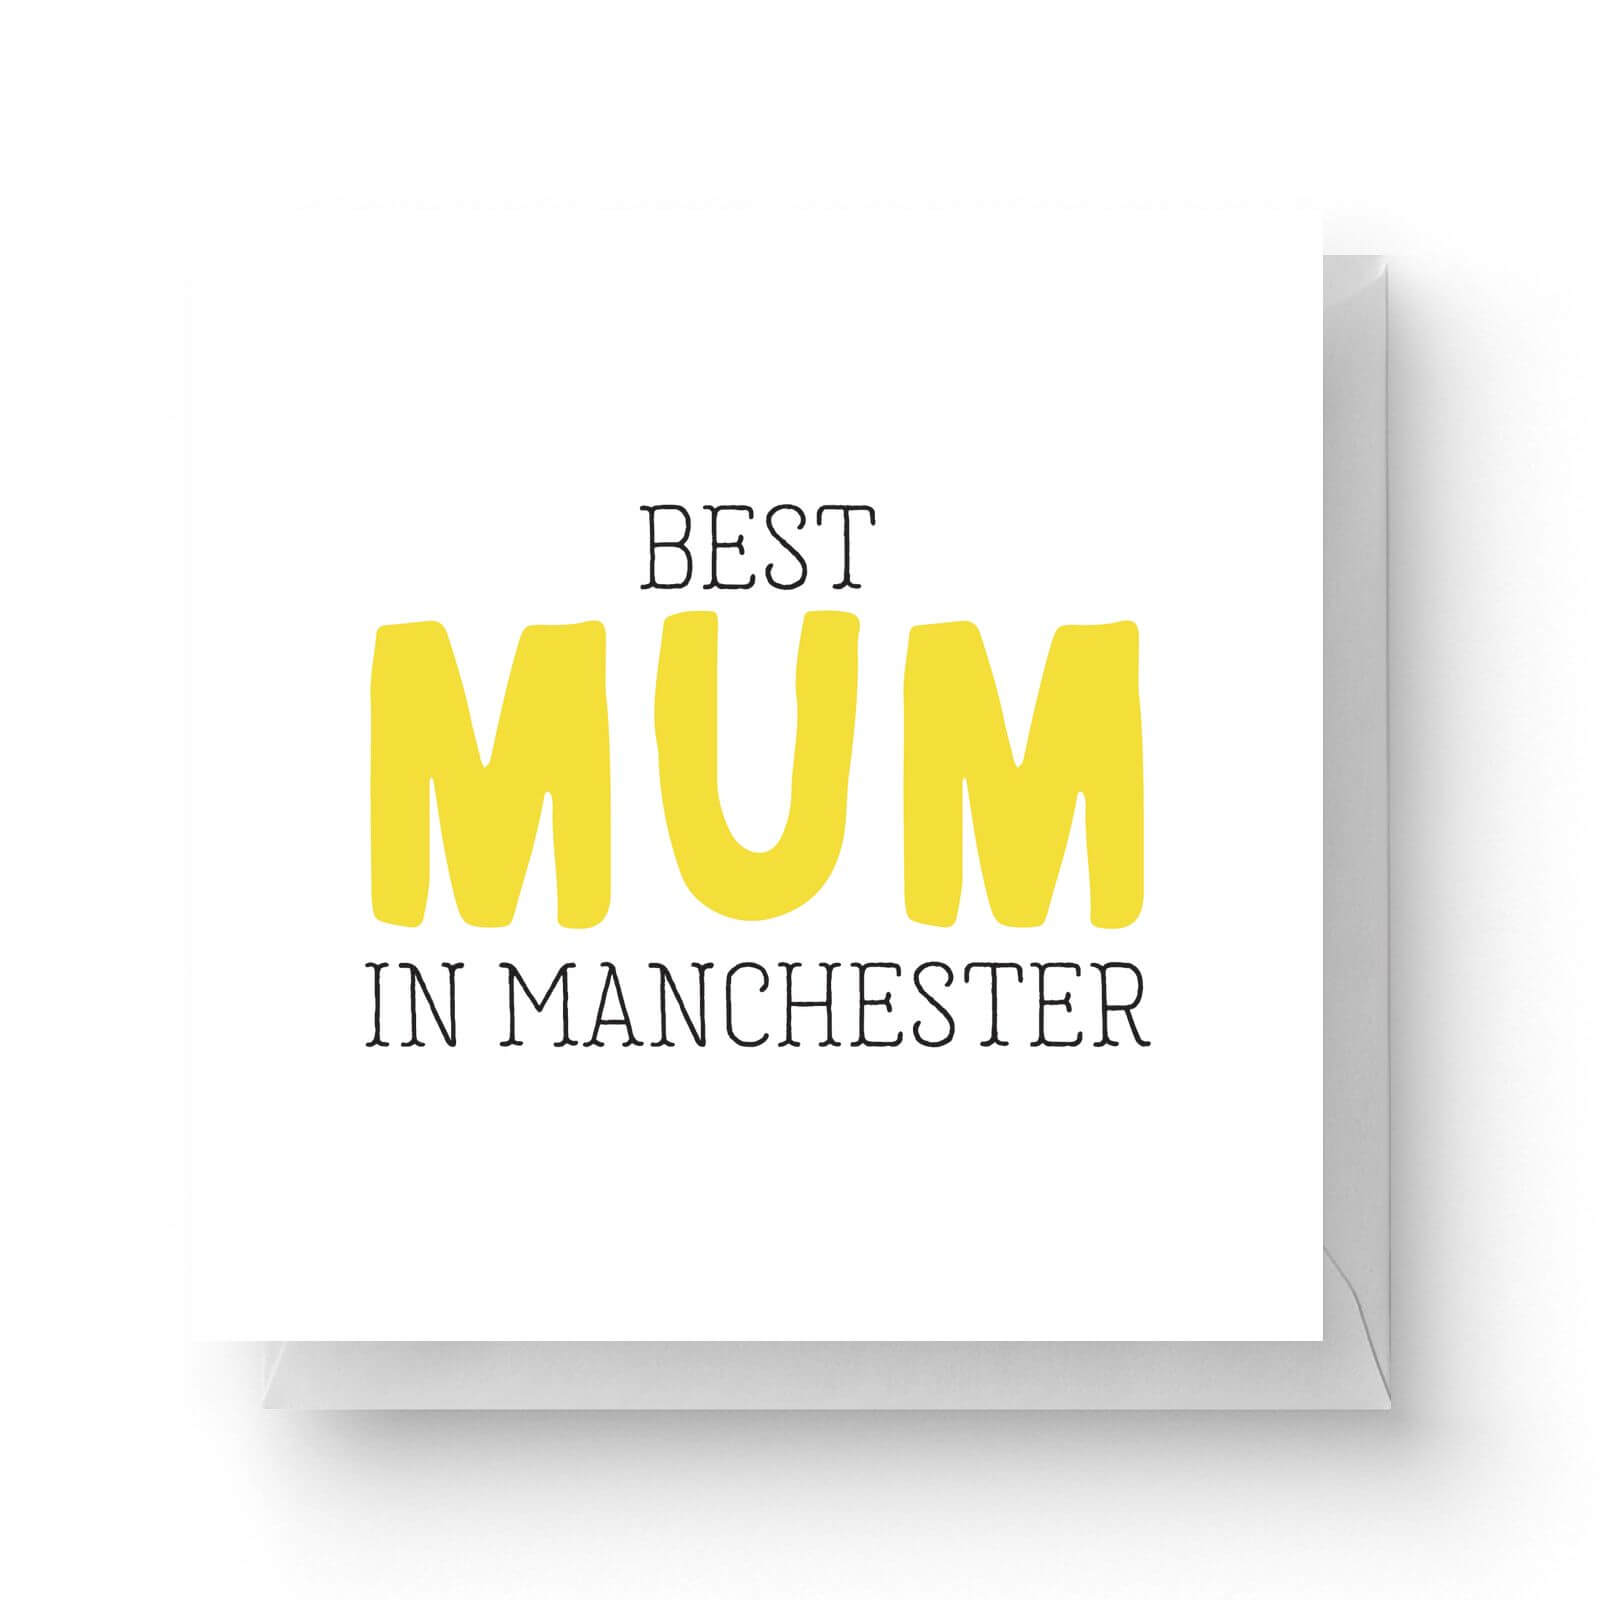 Image of Best Mum In Manchester Square Greetings Card (14.8cm x 14.8cm)